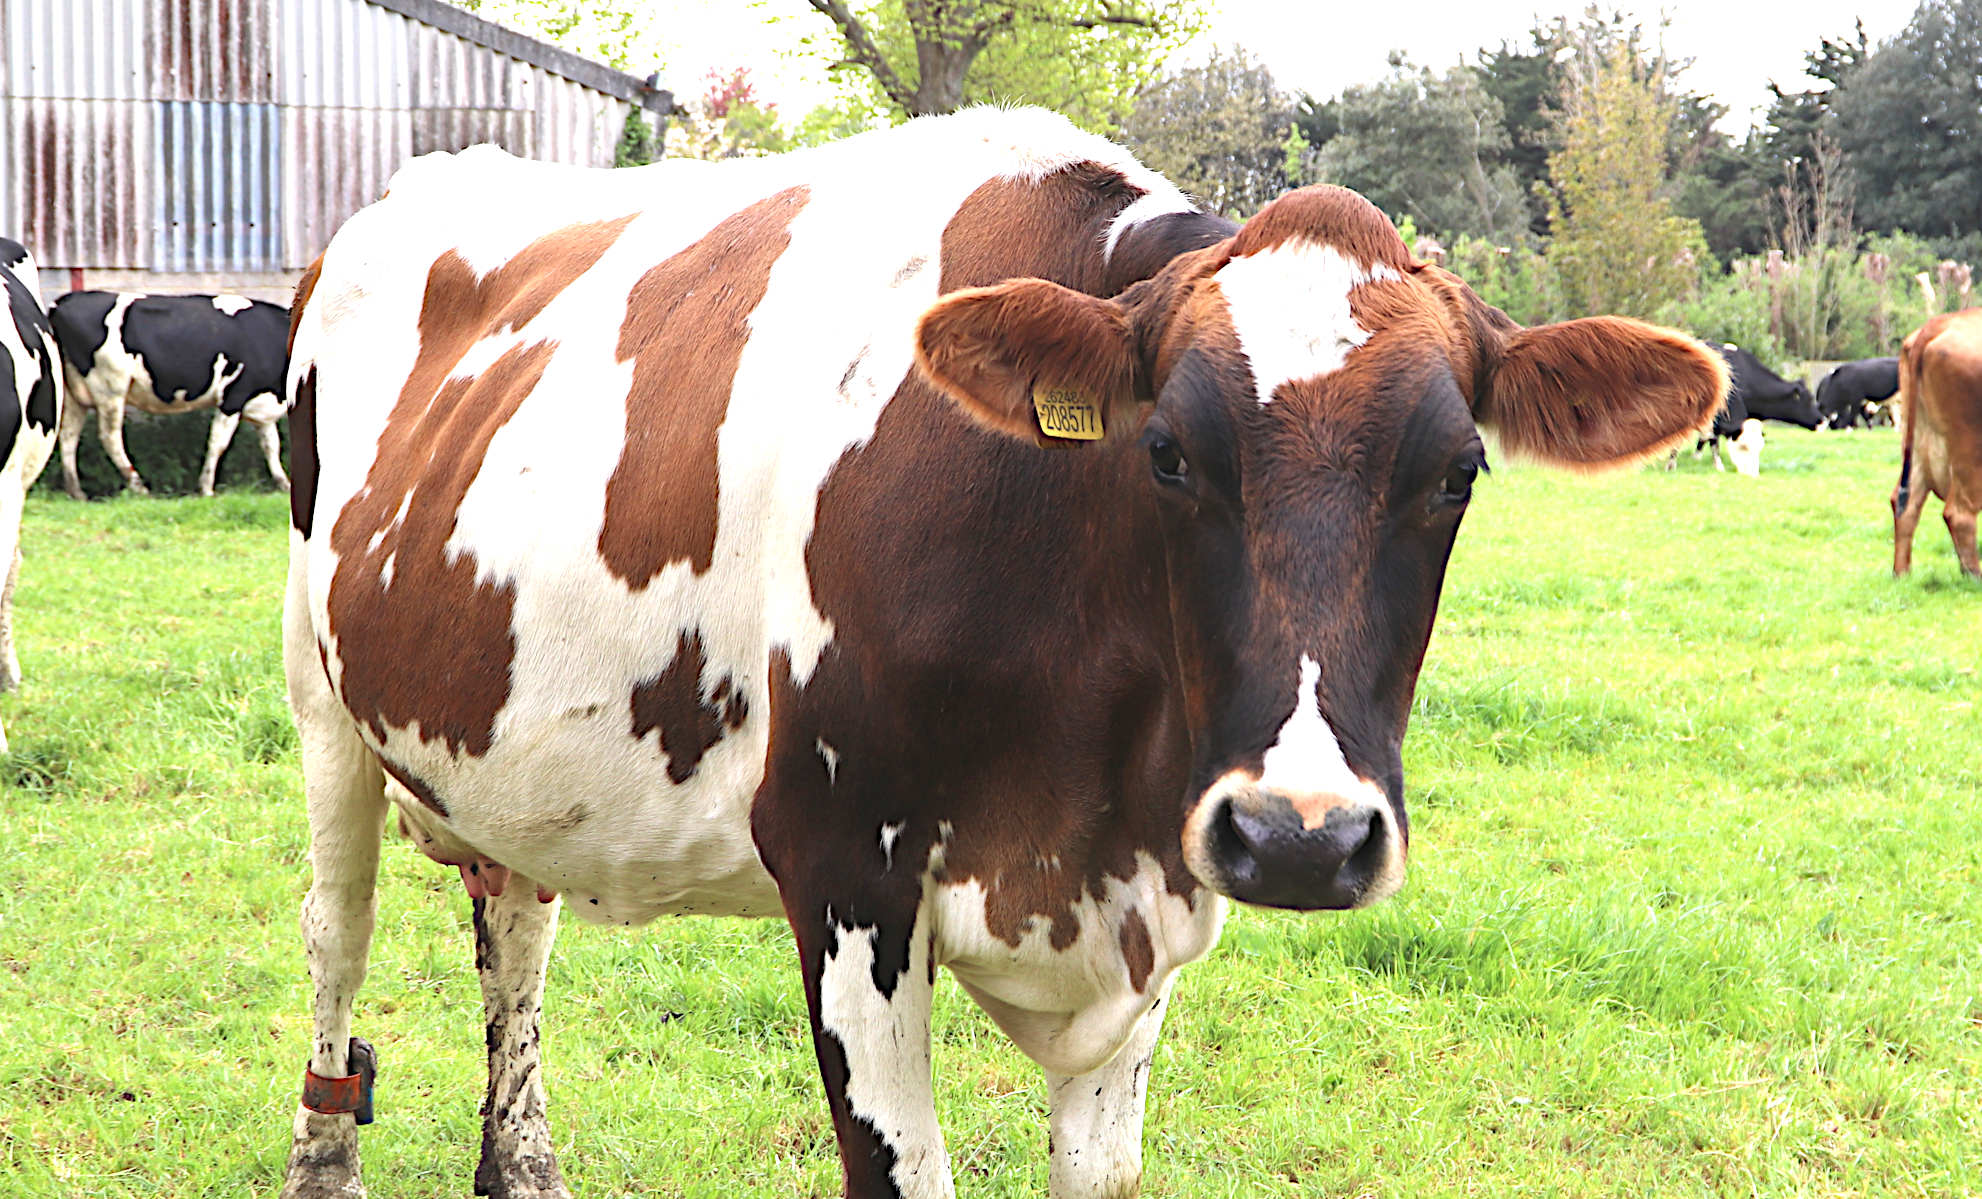 Harriet the dairy cow, wants to know what a hertiage asset is?